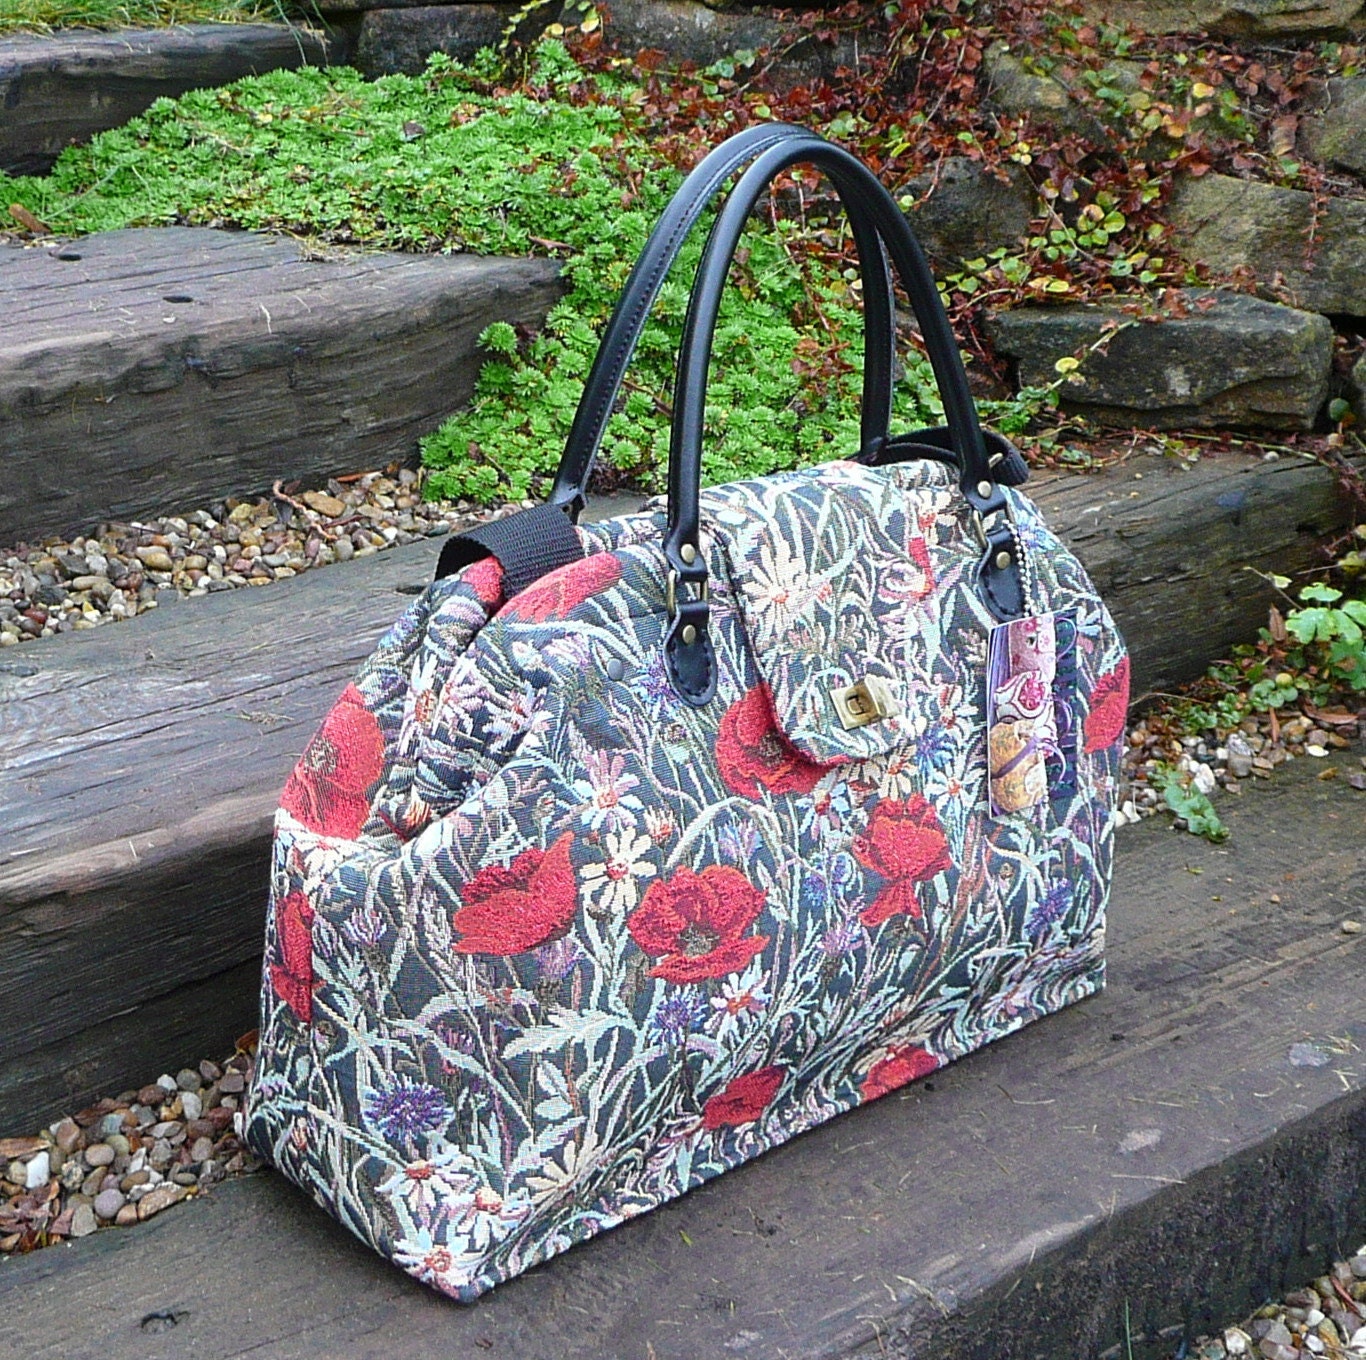 Carpet Bag Overnight Bag Mary Poppins Bag Tote Large day